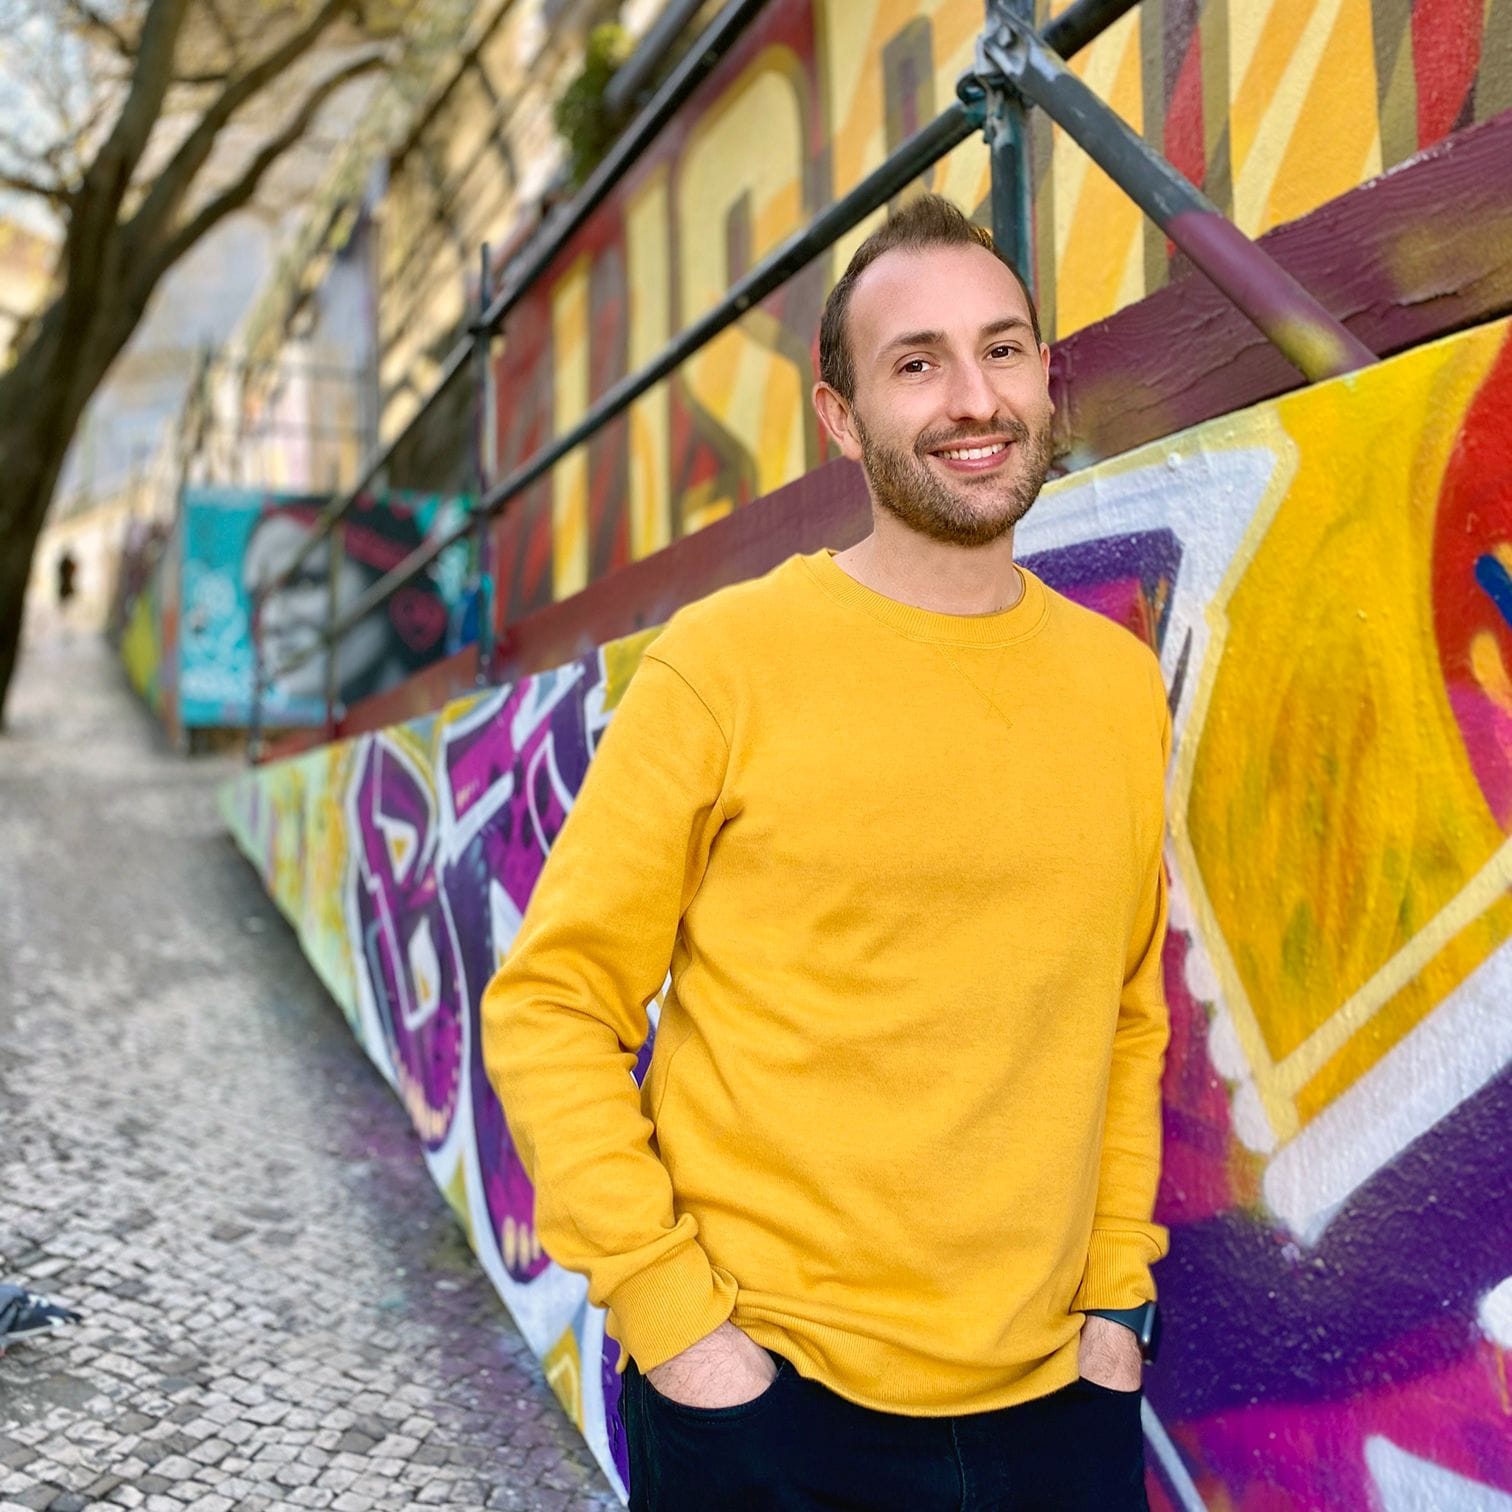 man standing in laneway with graffiti art and yellow sweater - Photo Credit: Decibel Architecture